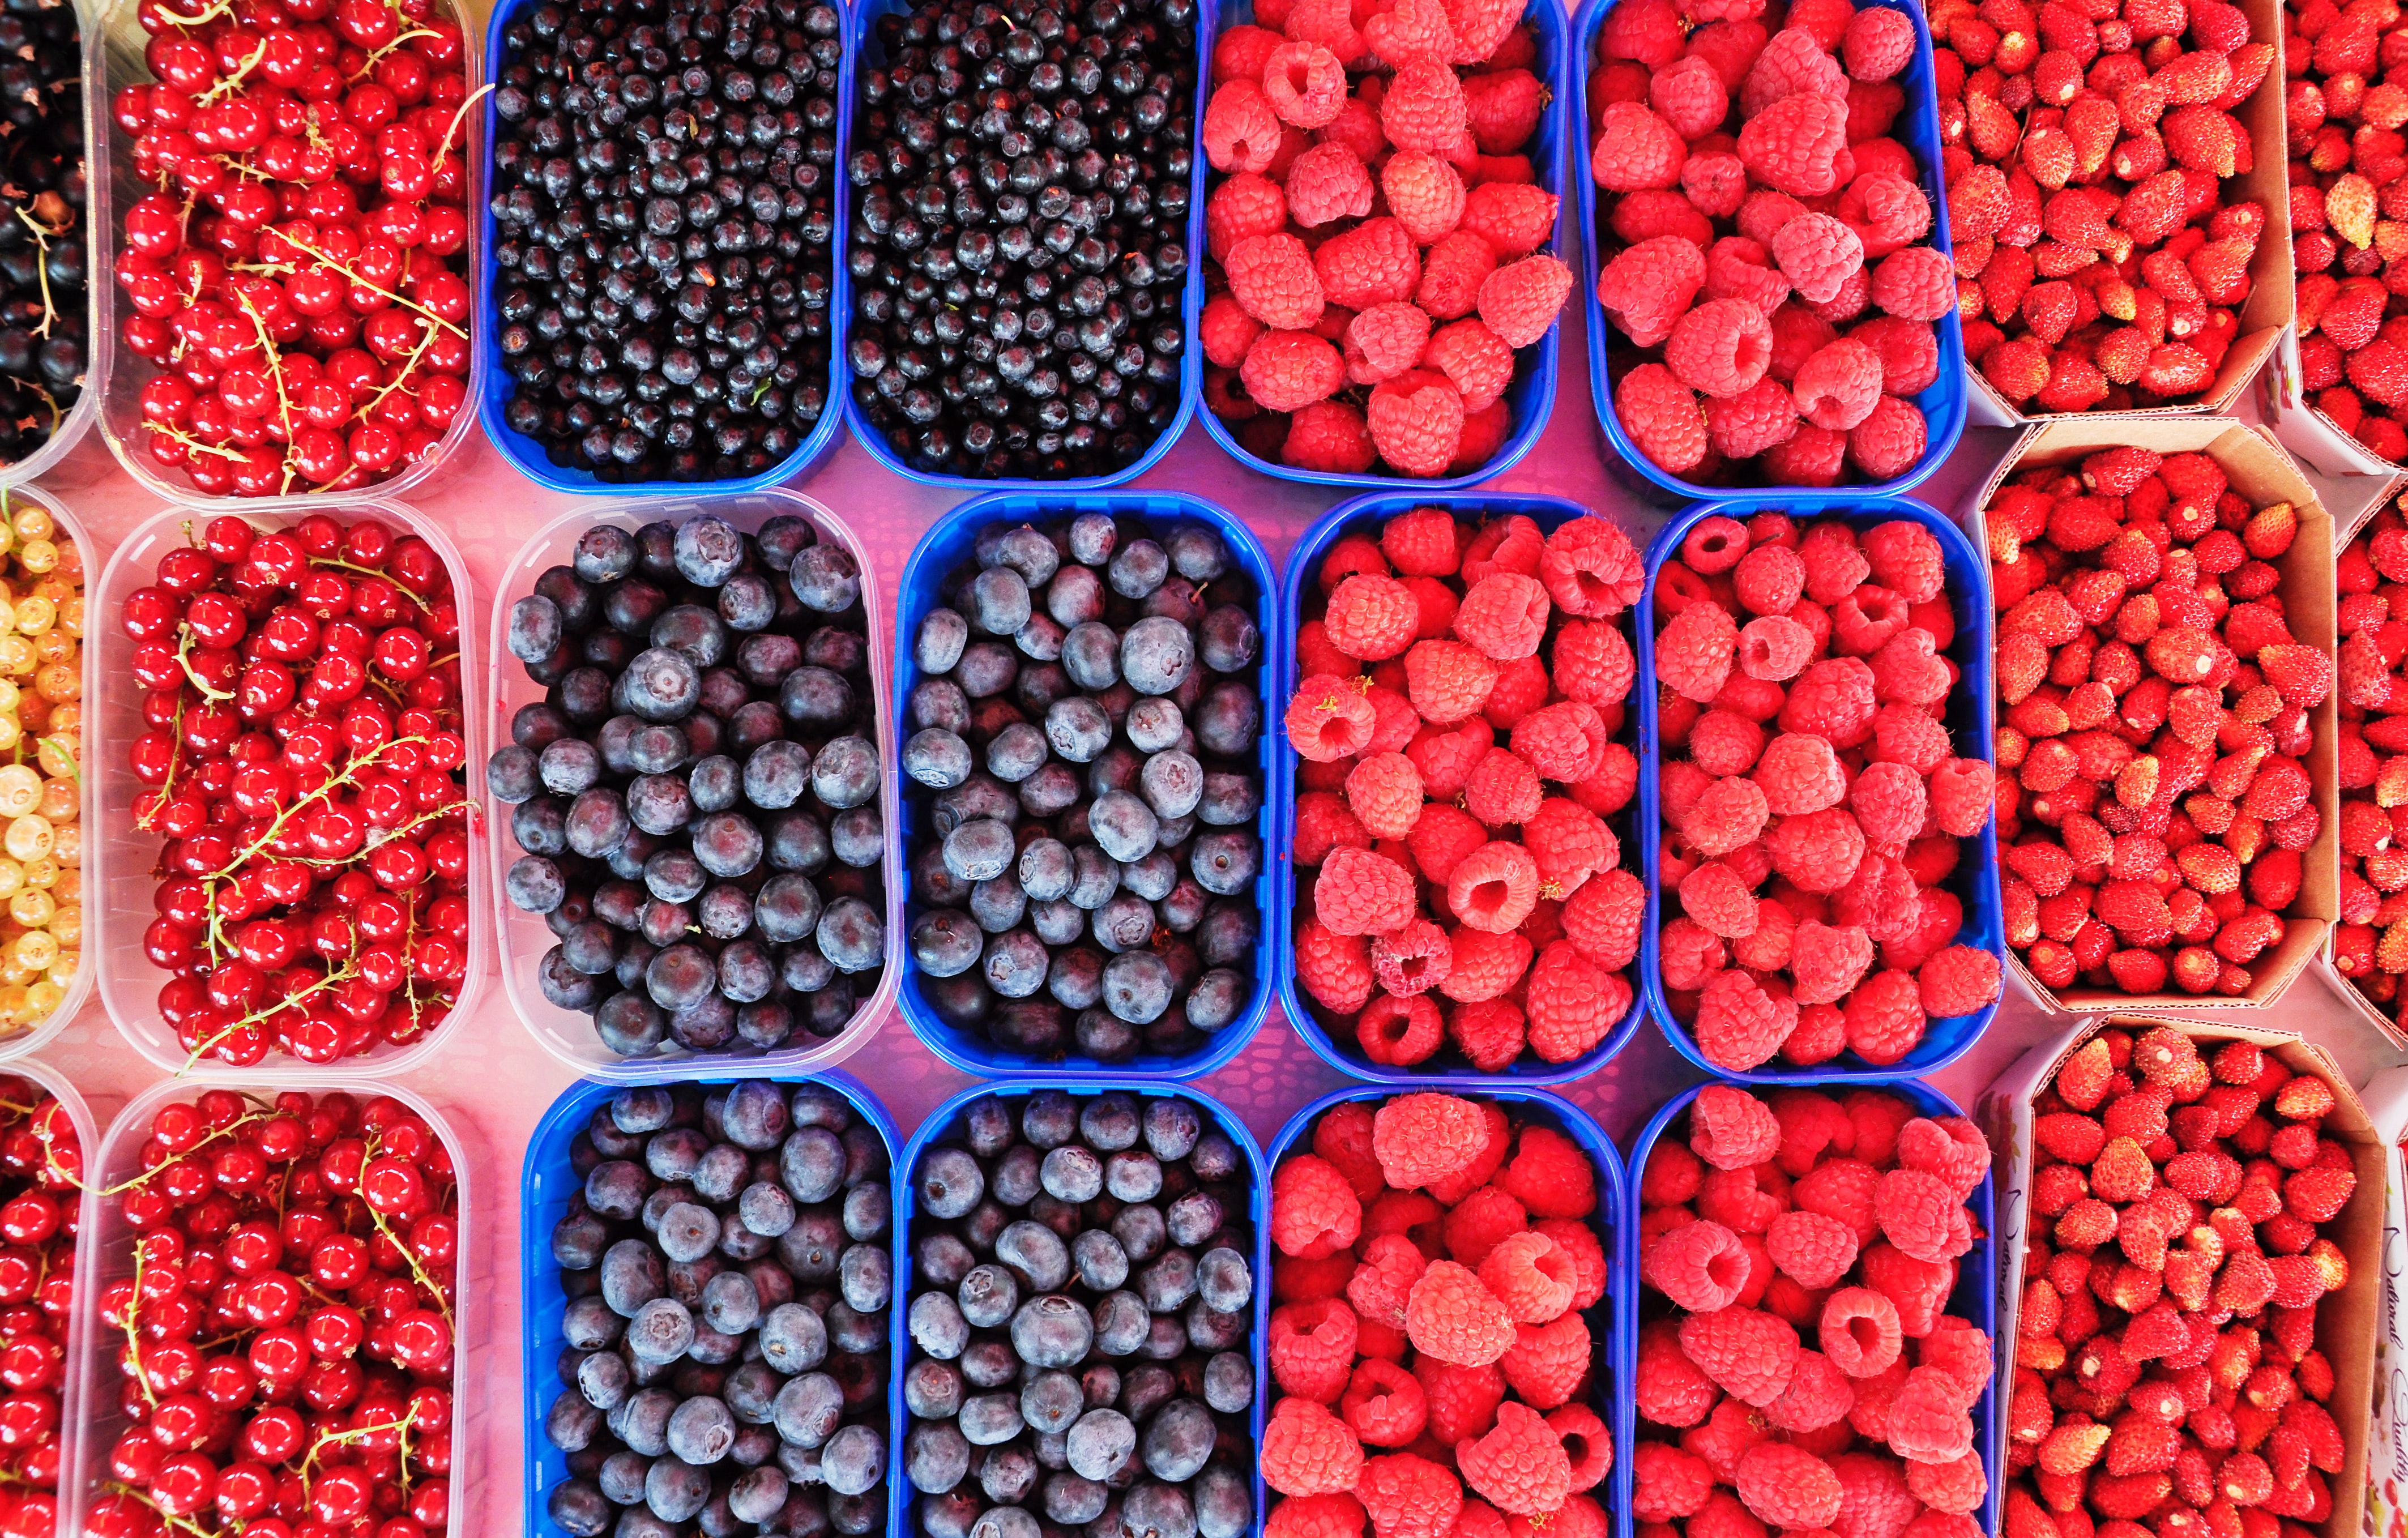 What Do Antioxidants Do For Your Body?